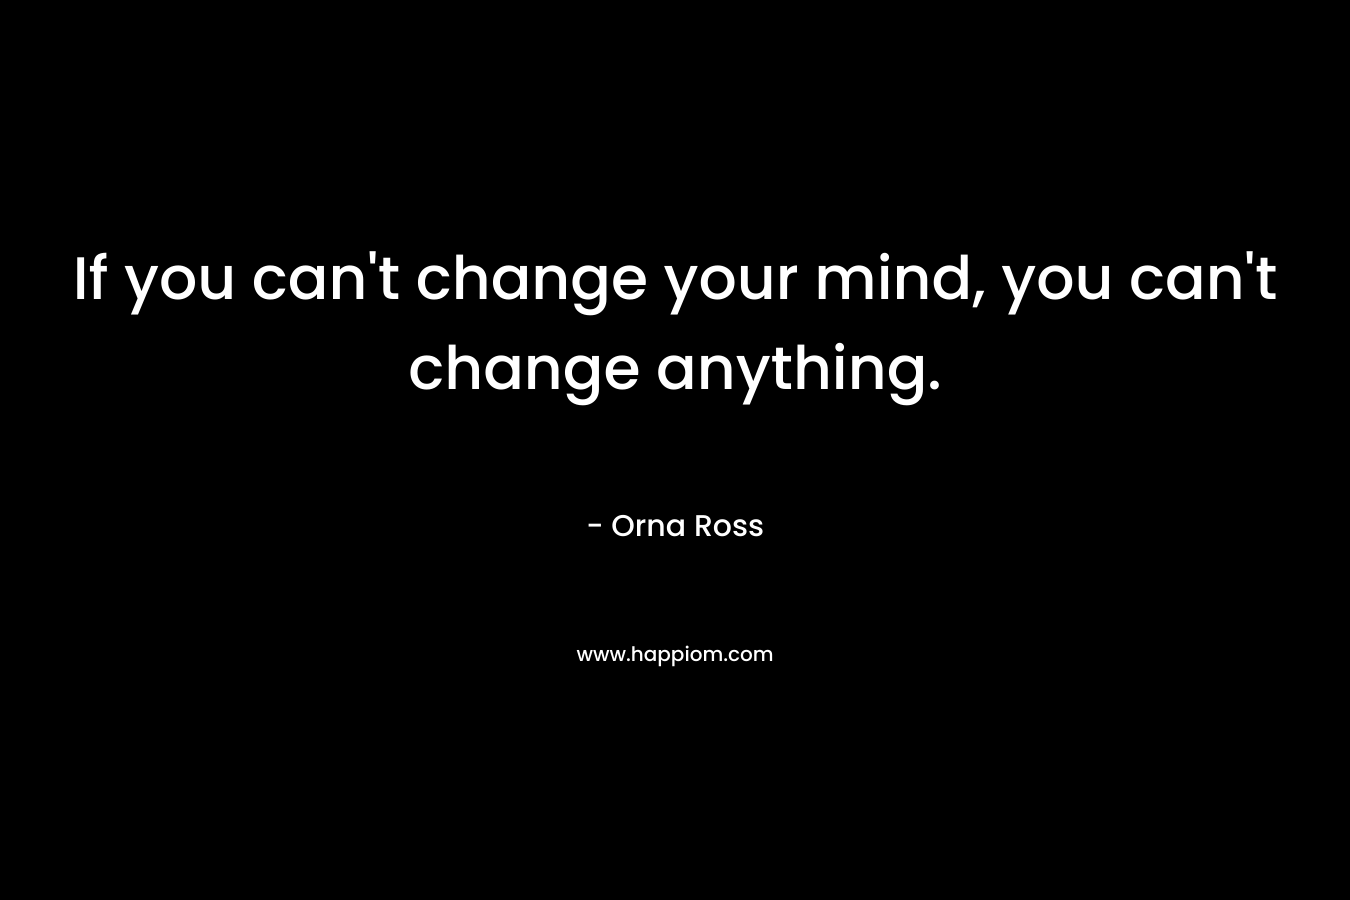 If you can't change your mind, you can't change anything.